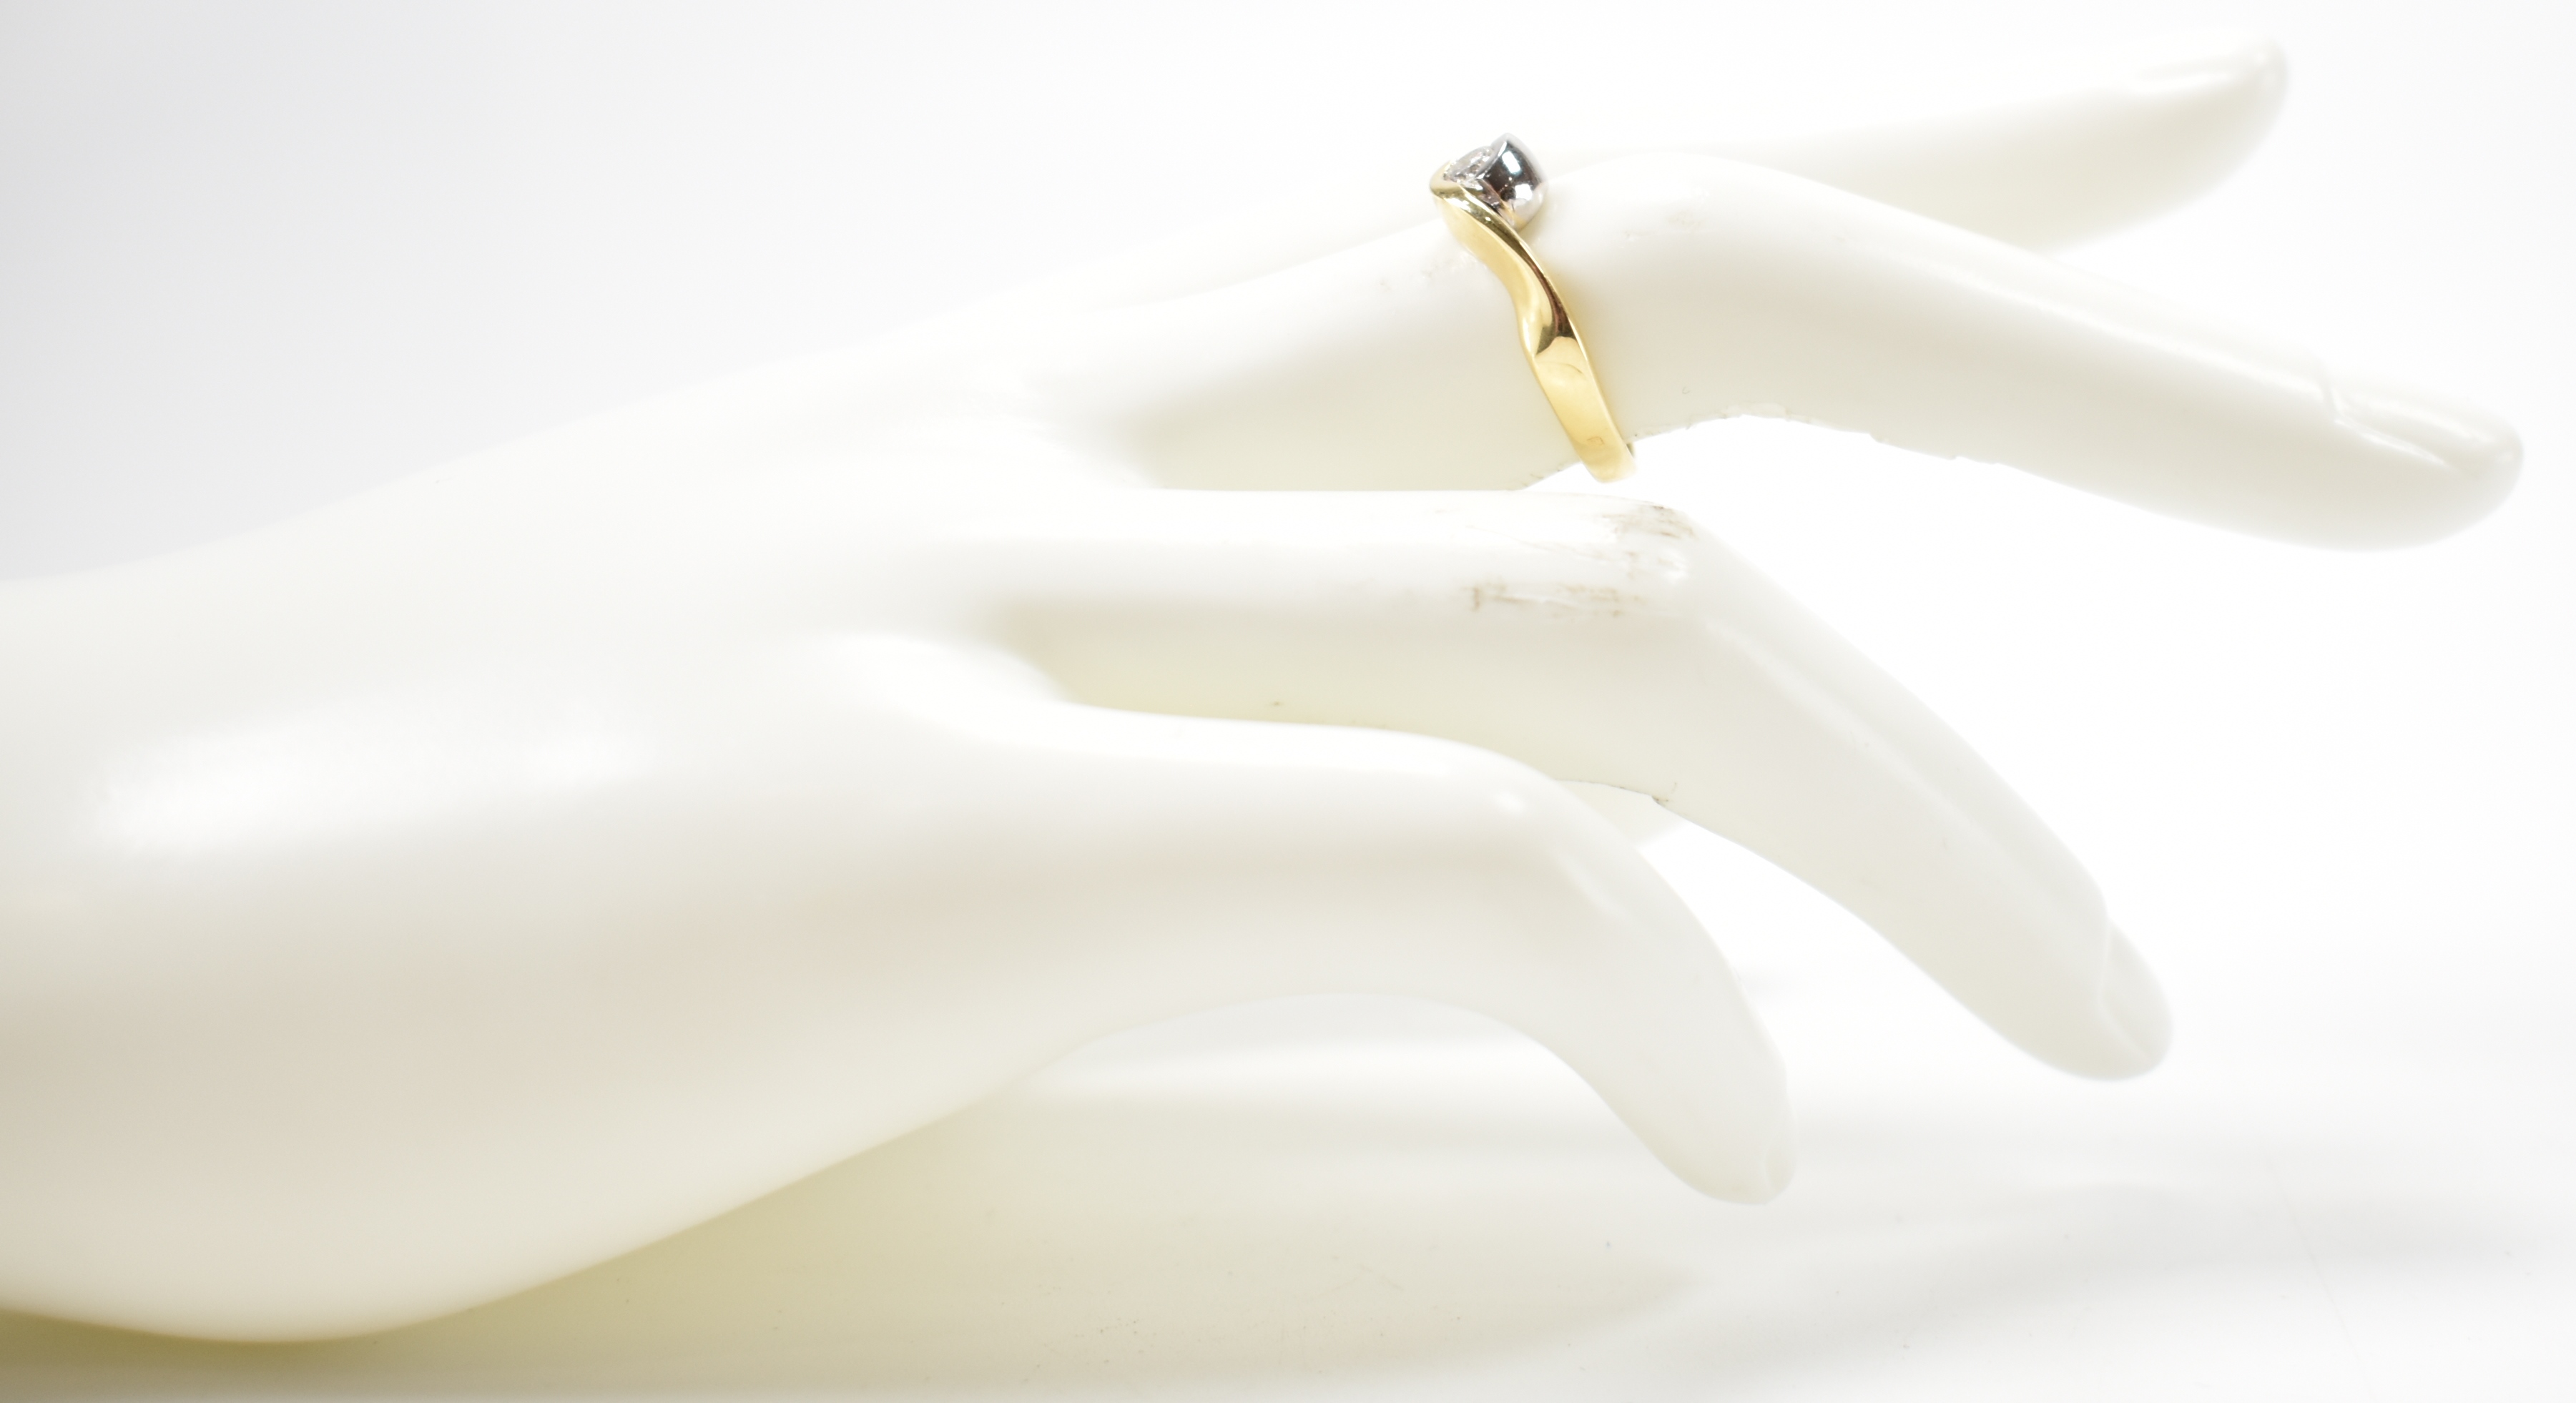 TWO TONE GOLD & DIAMOND CROSSOVER RING - Image 9 of 9